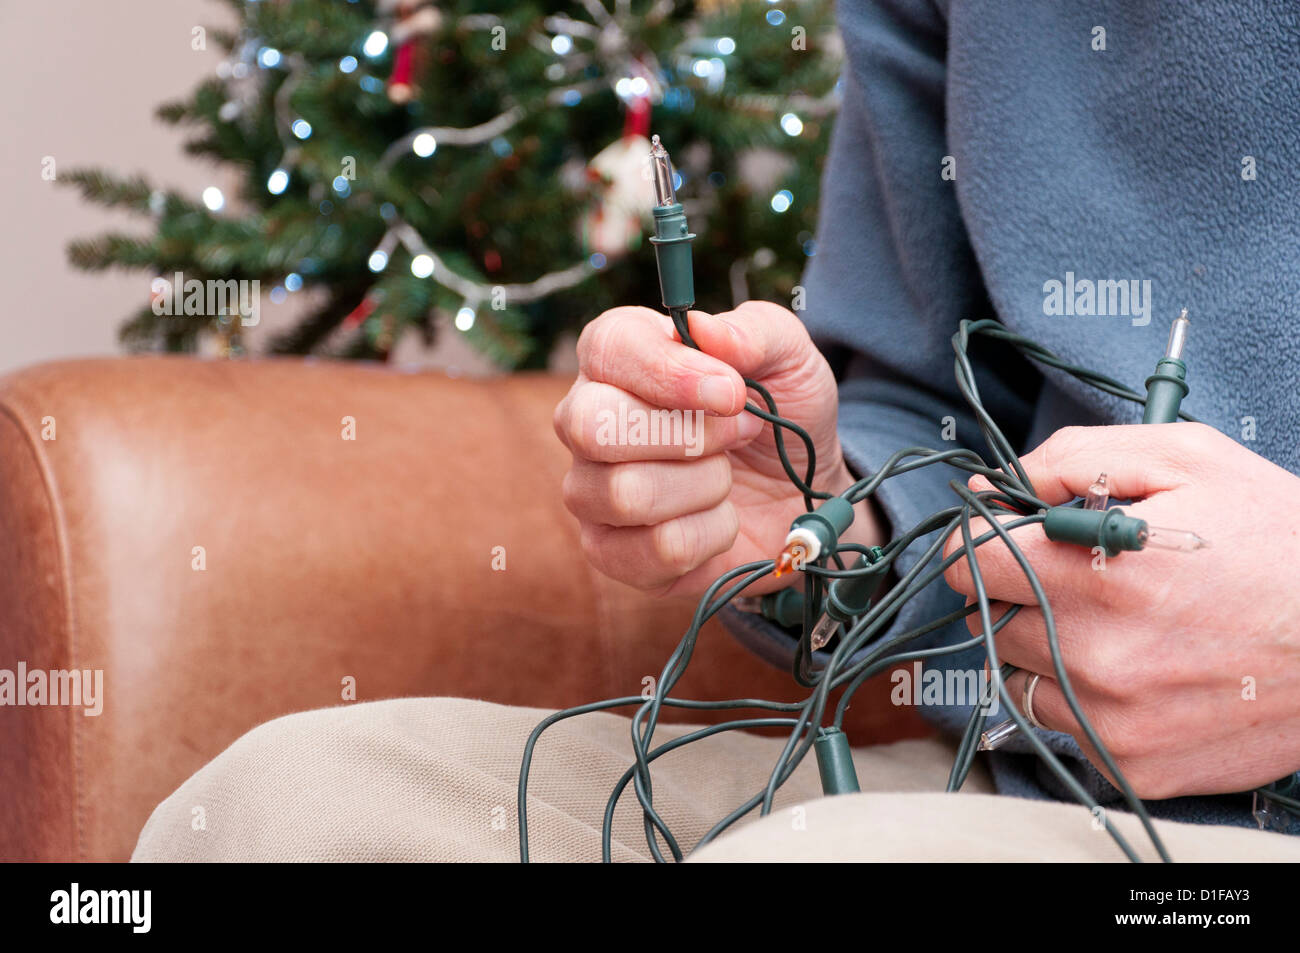 Christmas stress man with tangled bunch of string lights looking for faulty bulb. Stock Photo